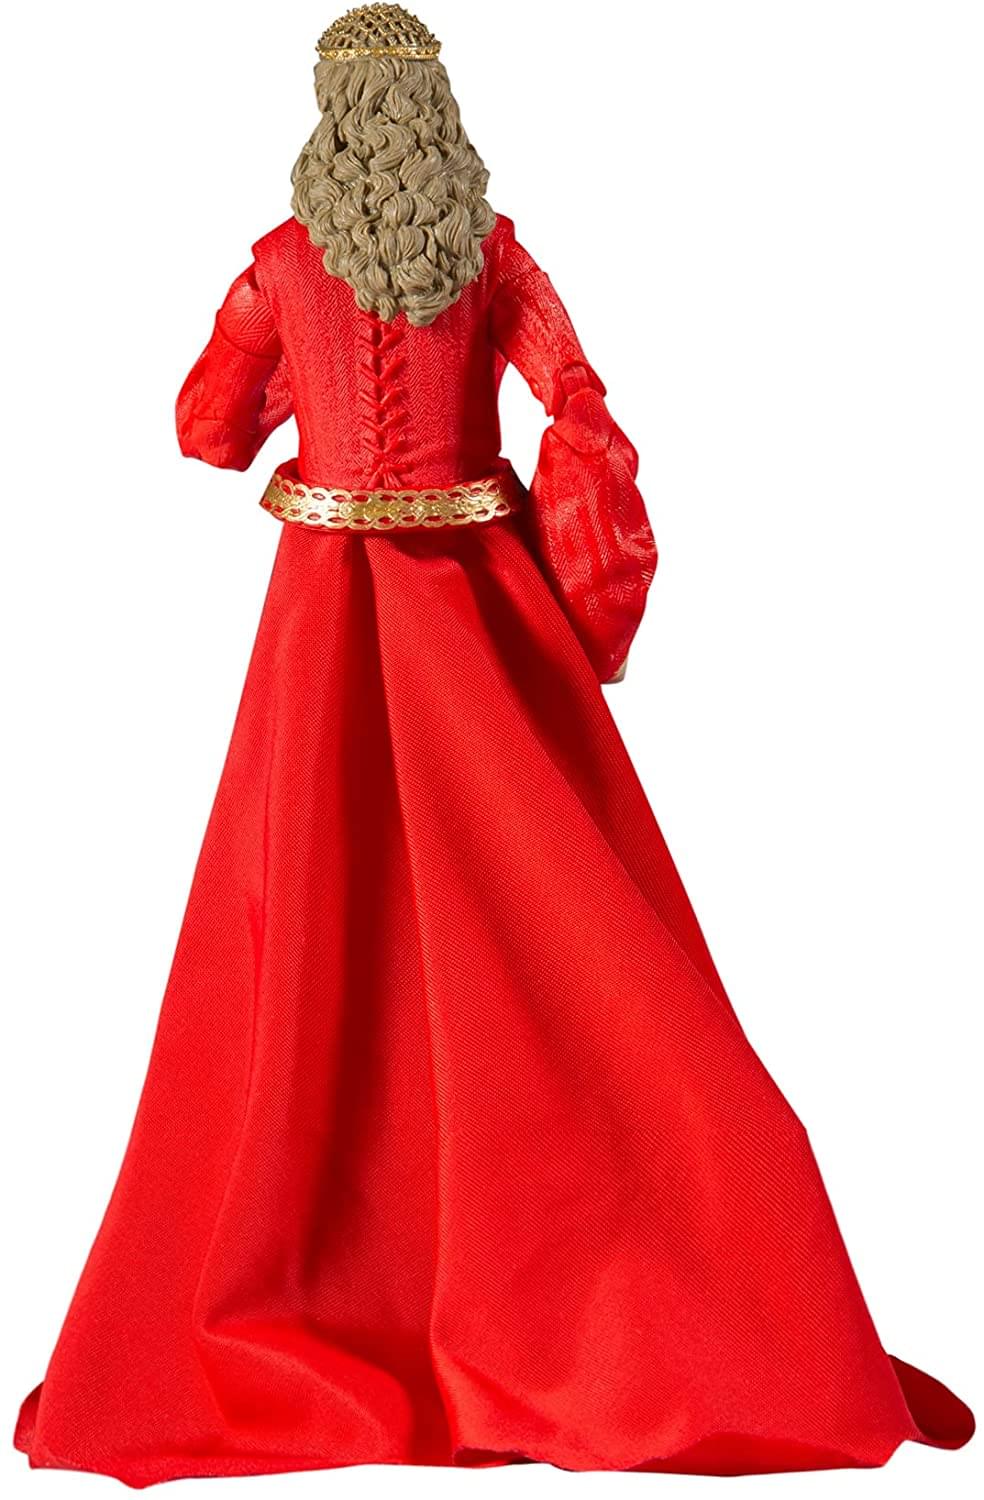 The Princess Bride 7 Inch Scale Action Figure | Princess Buttercup (Red Dress)